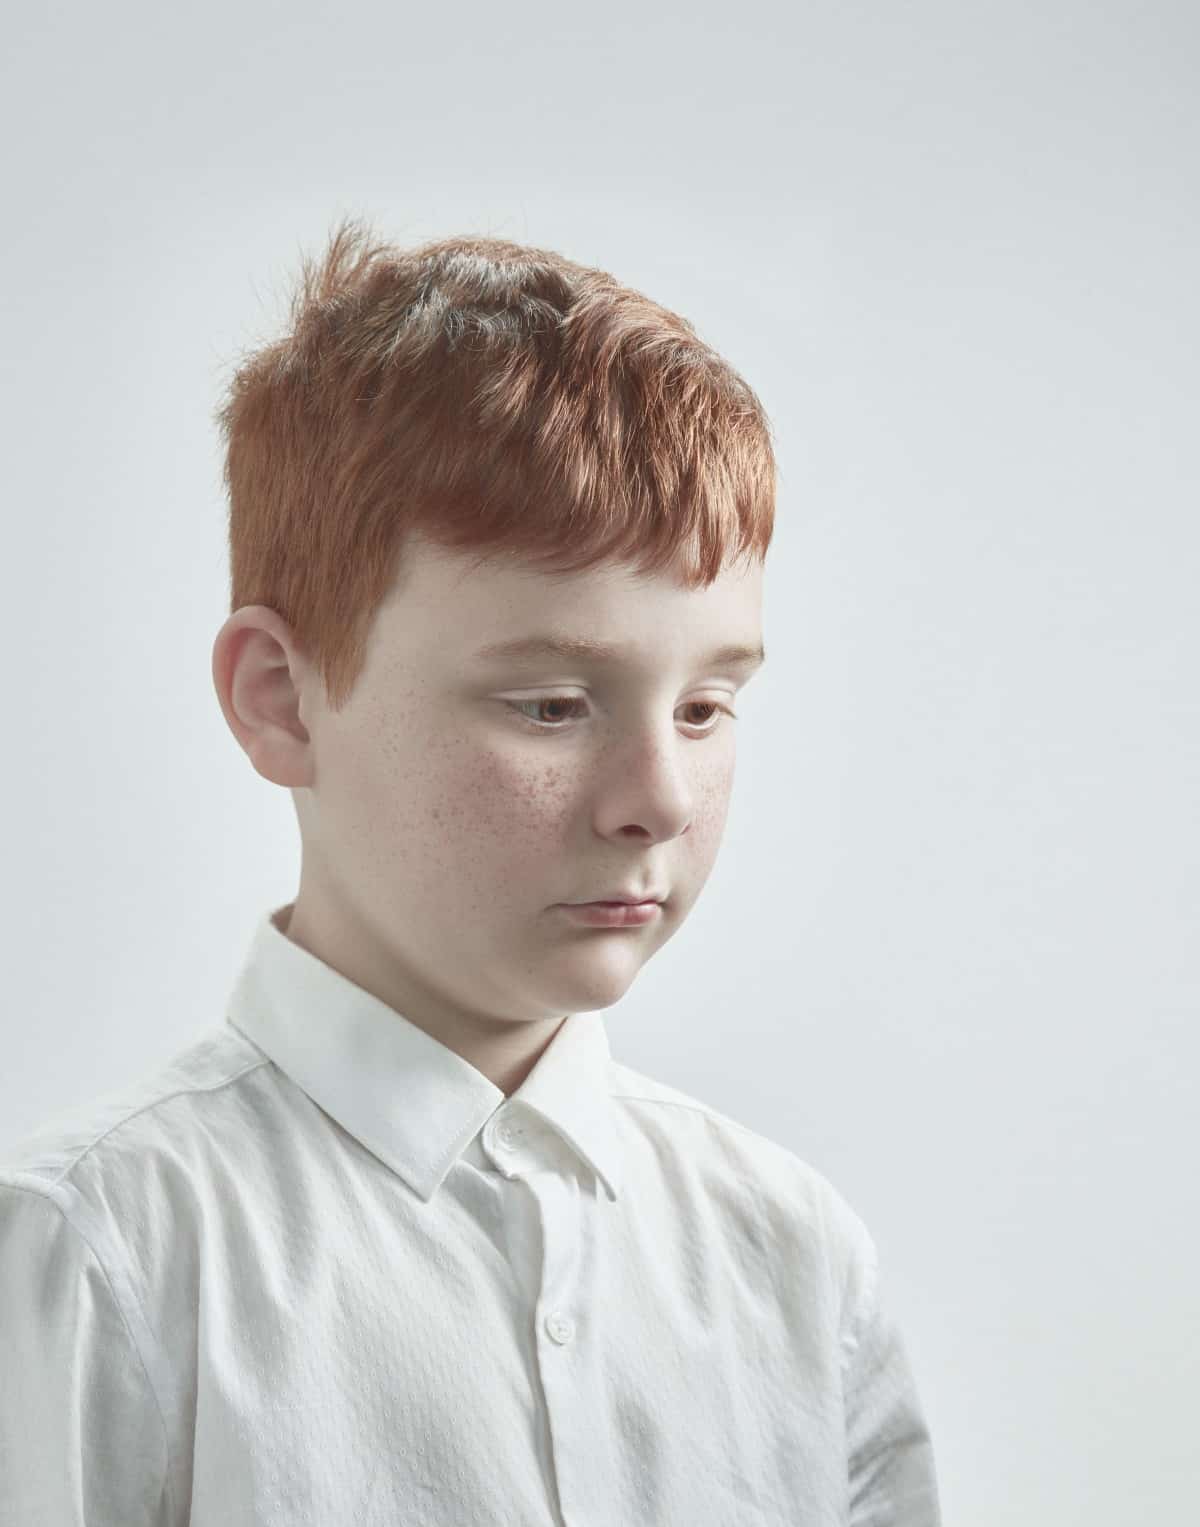 Portrait of a young red headed boy